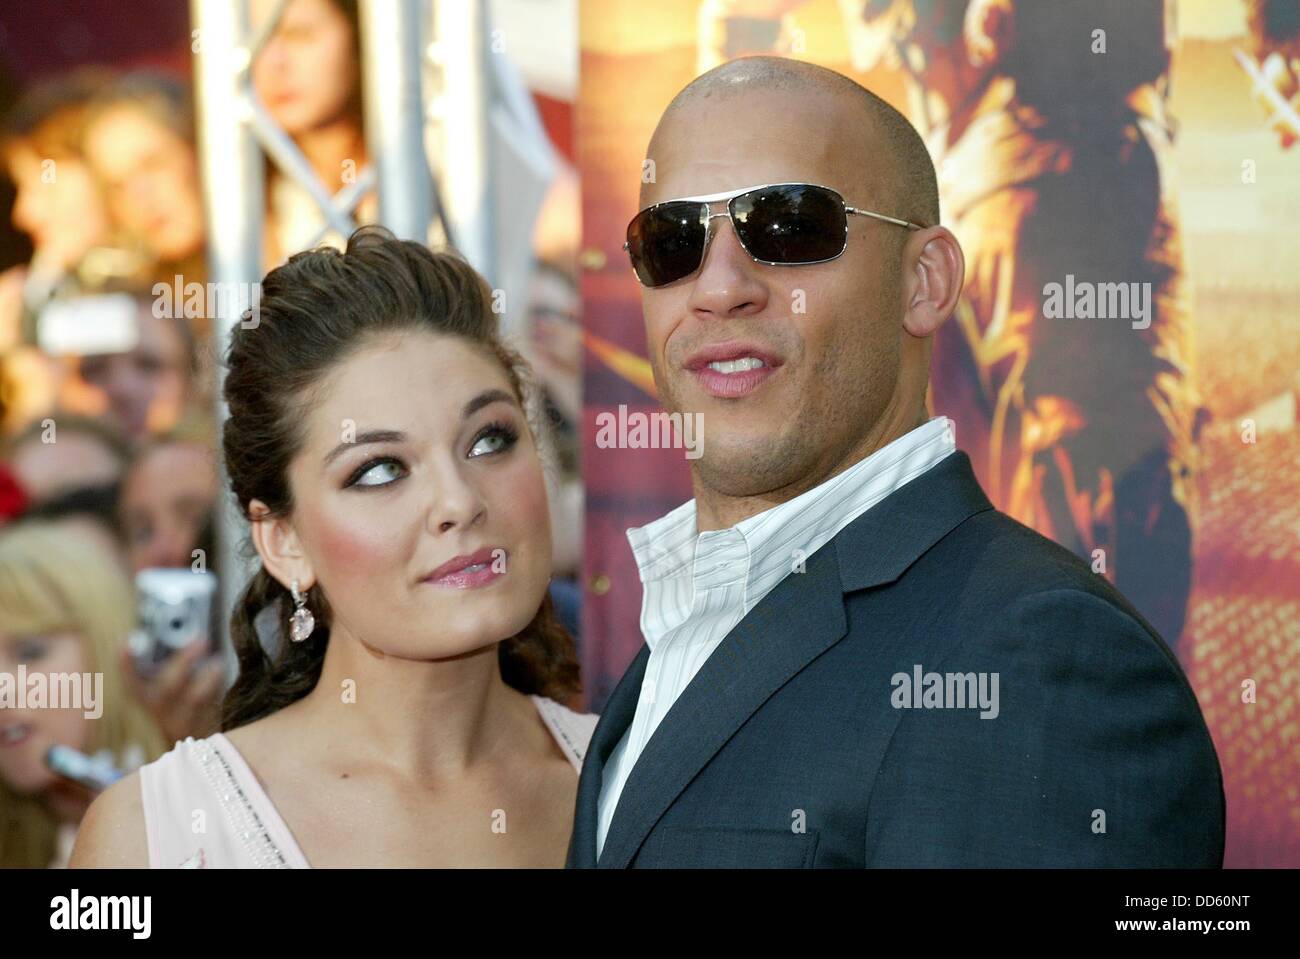 Alexa Davalos High Resolution Stock Photography and Images - Alamy